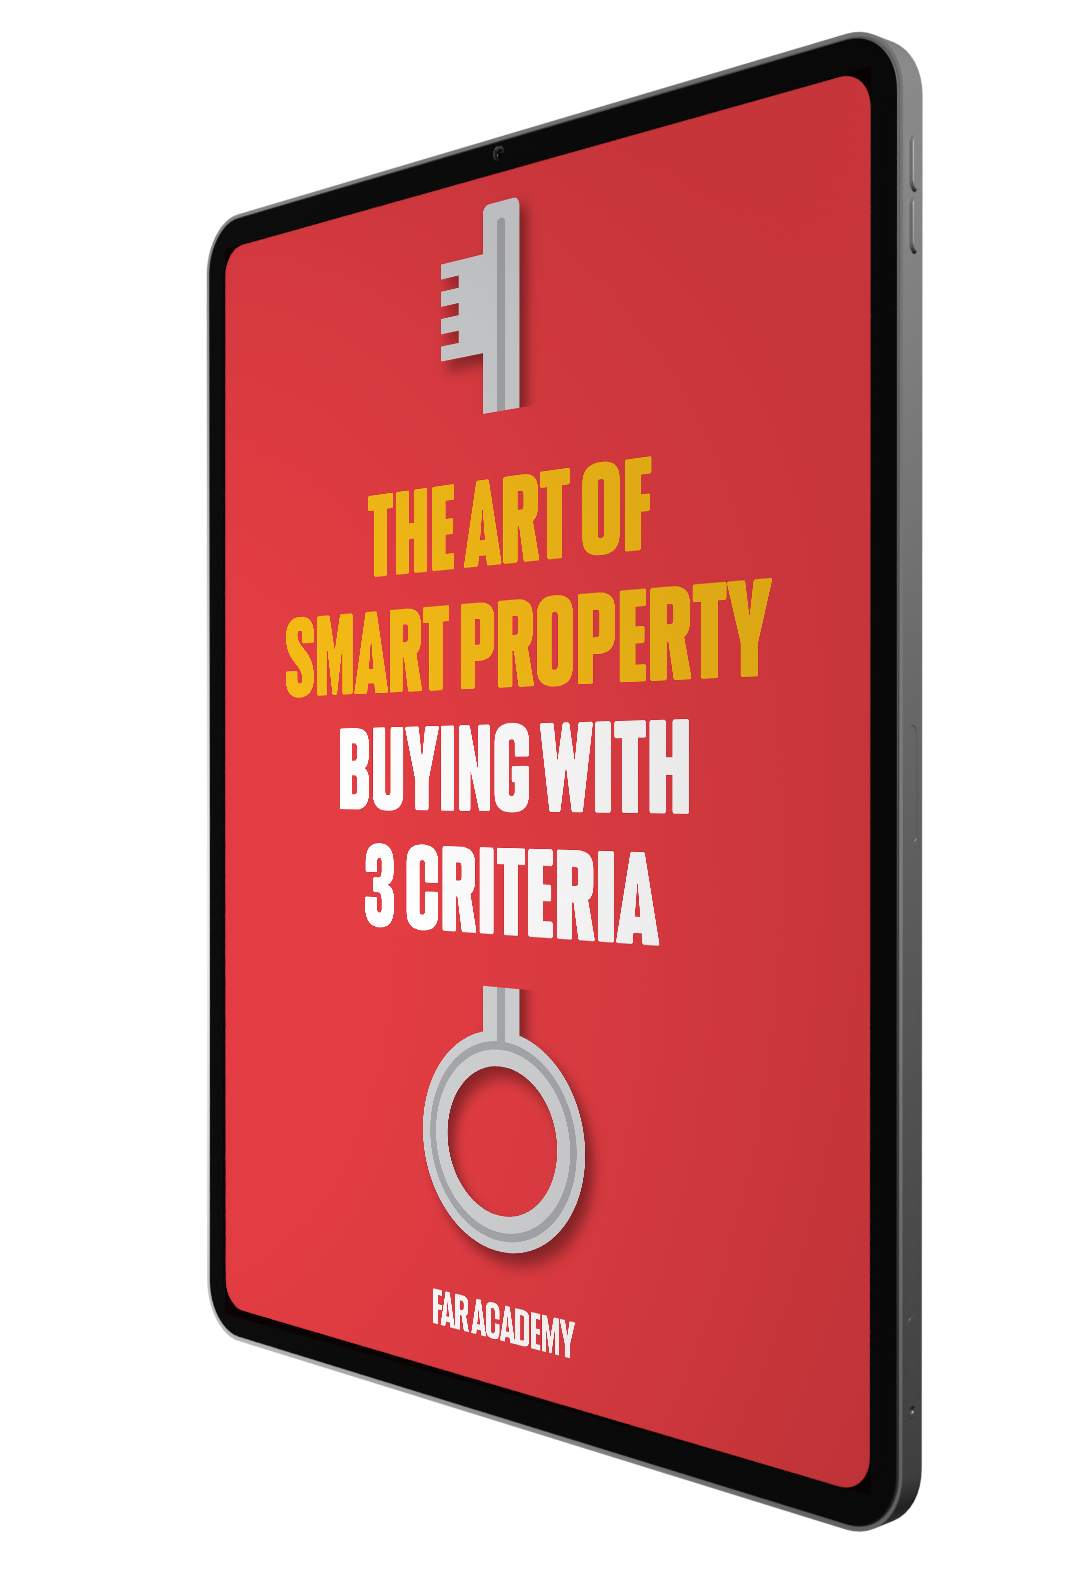 The Art of Smart Property Buying With 3 Criteria